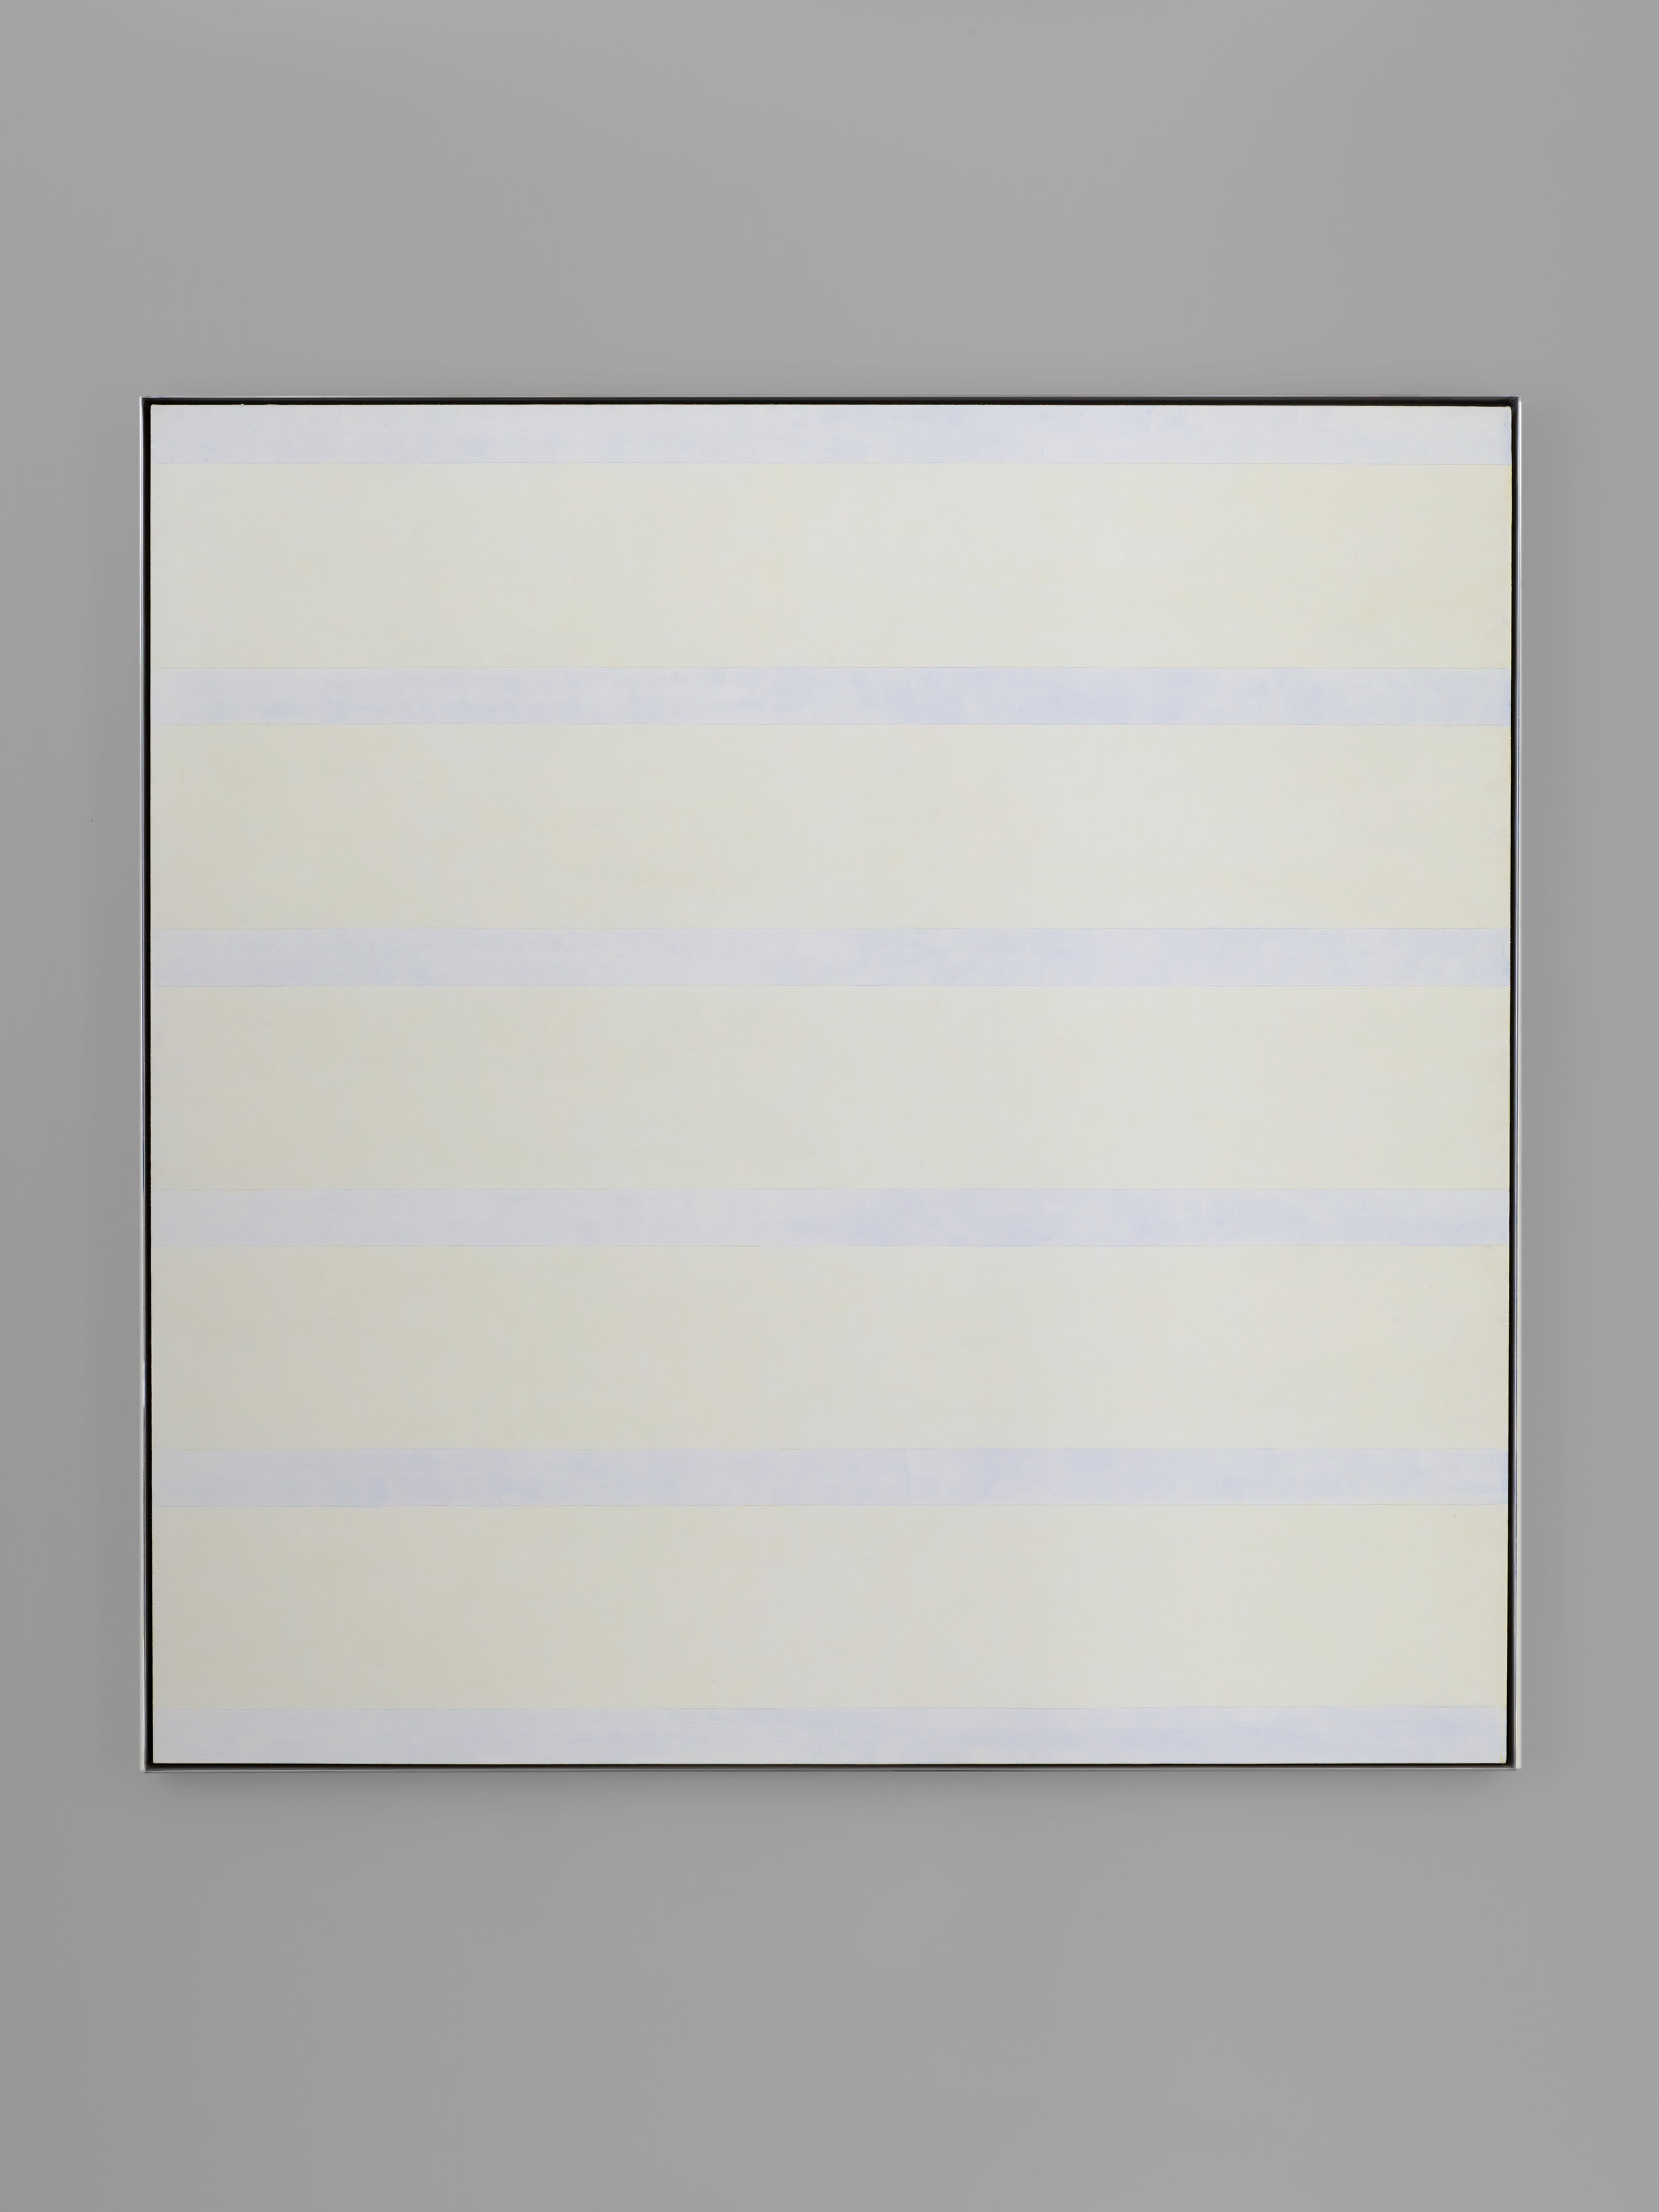  AGNES MARTIN (1912-2004)    Untitled #15 (Peace) , 1996. Acrylic and graphite on canvas. 60 x 60 inches. 